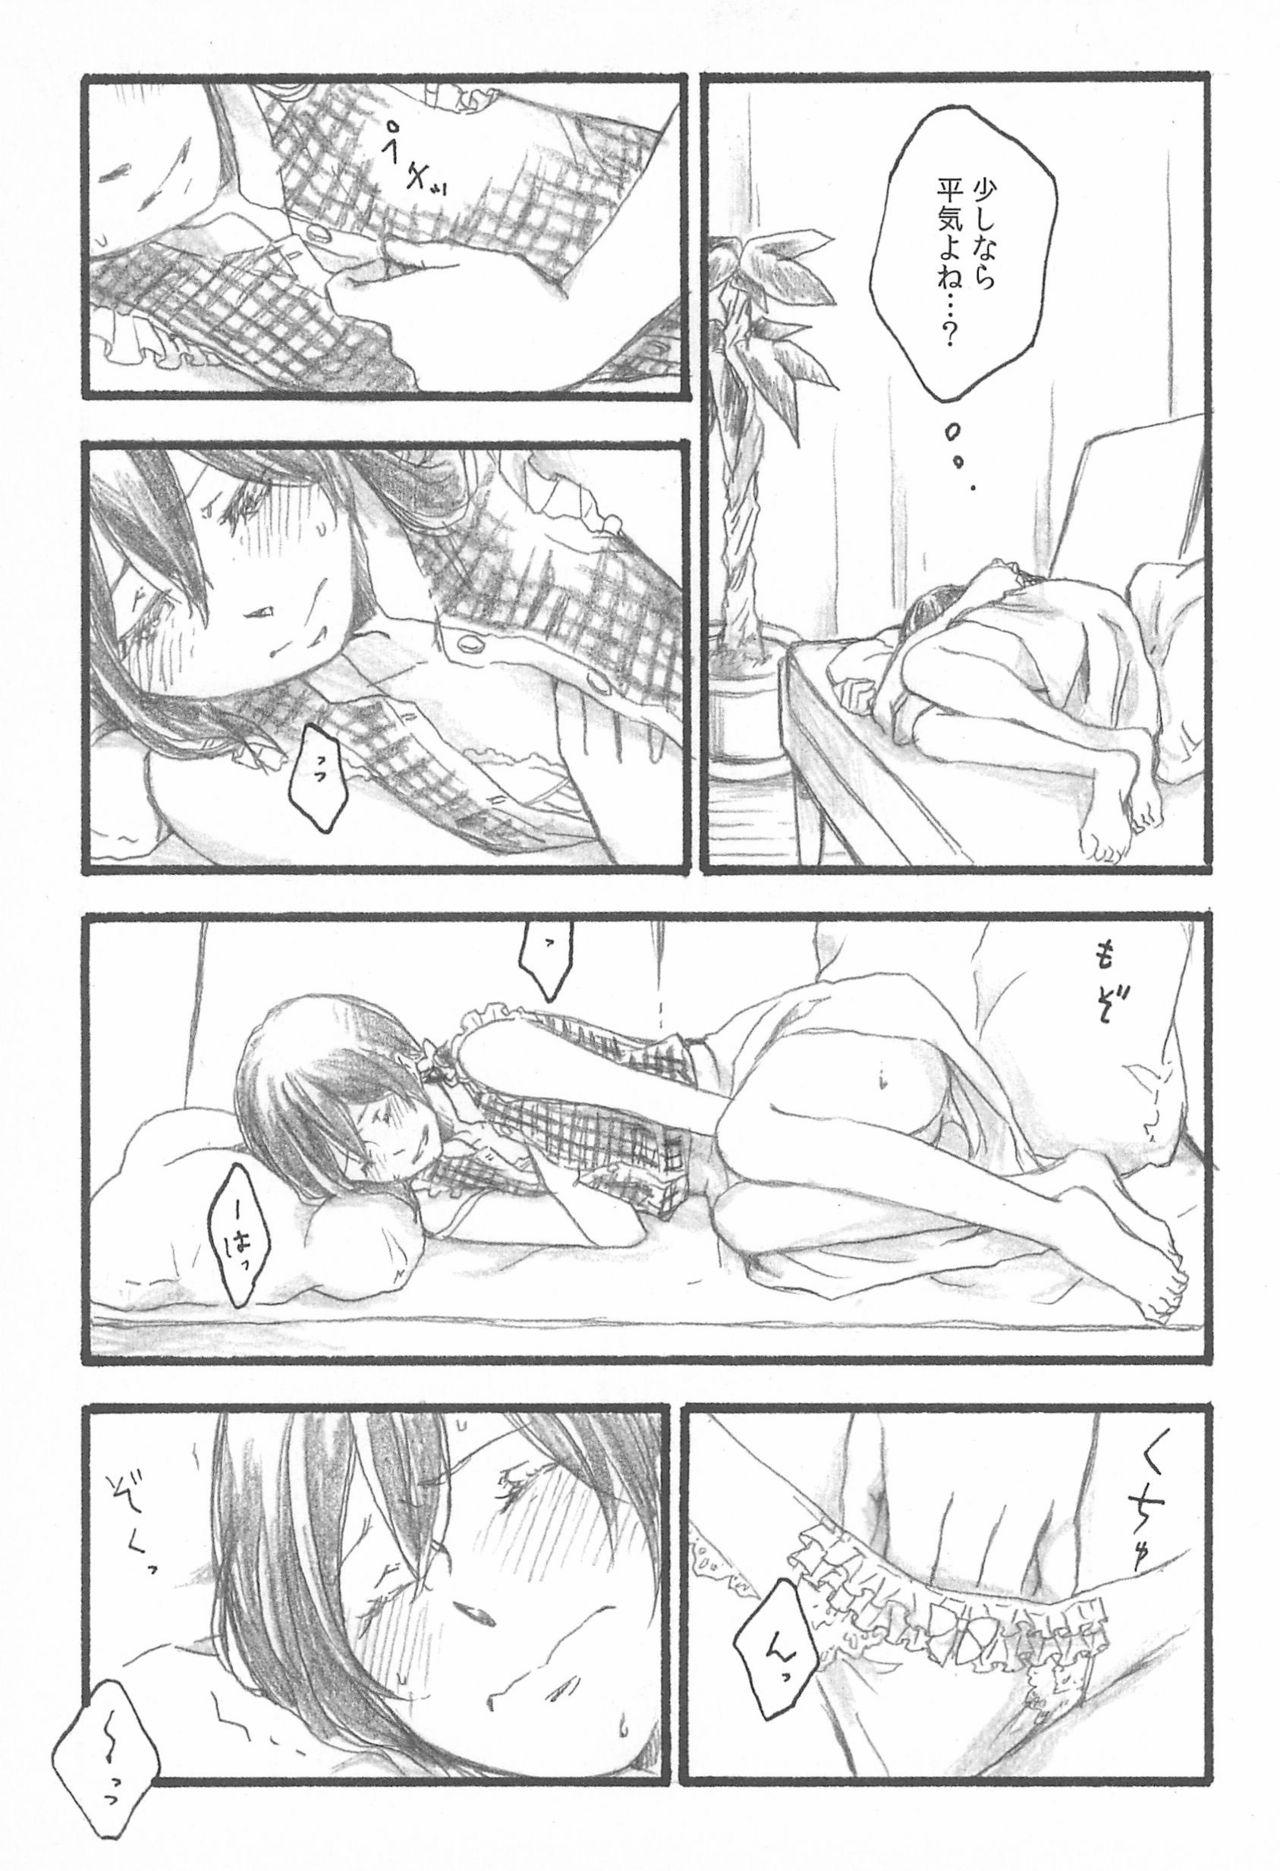 Porra Happiness - Love live Livesex - Page 7